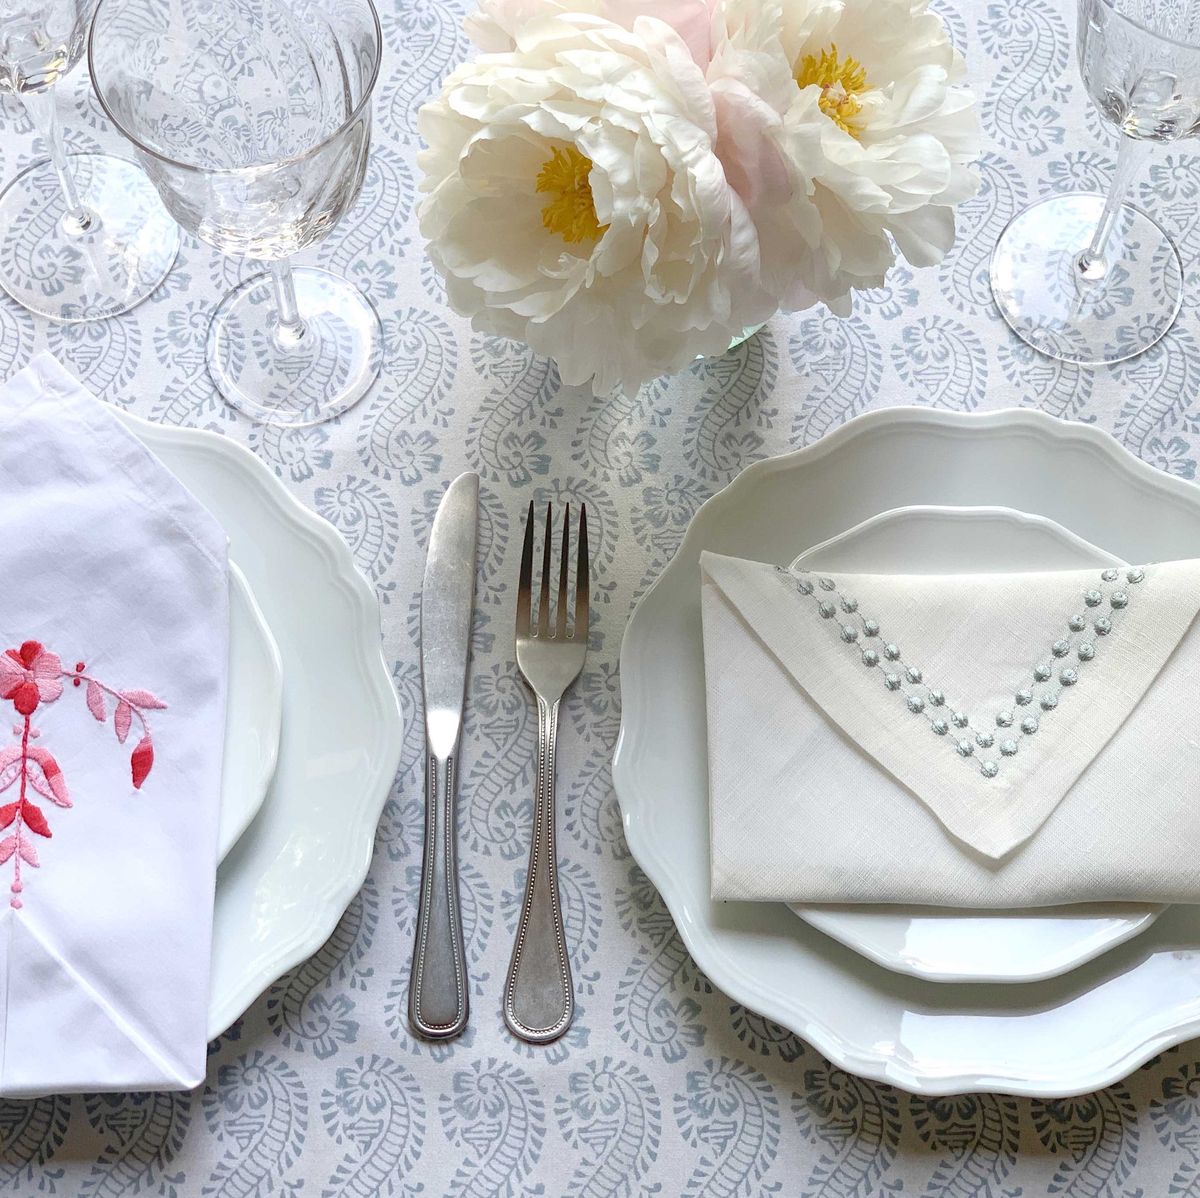 How to Properly Use Napkins at the Dinner Table